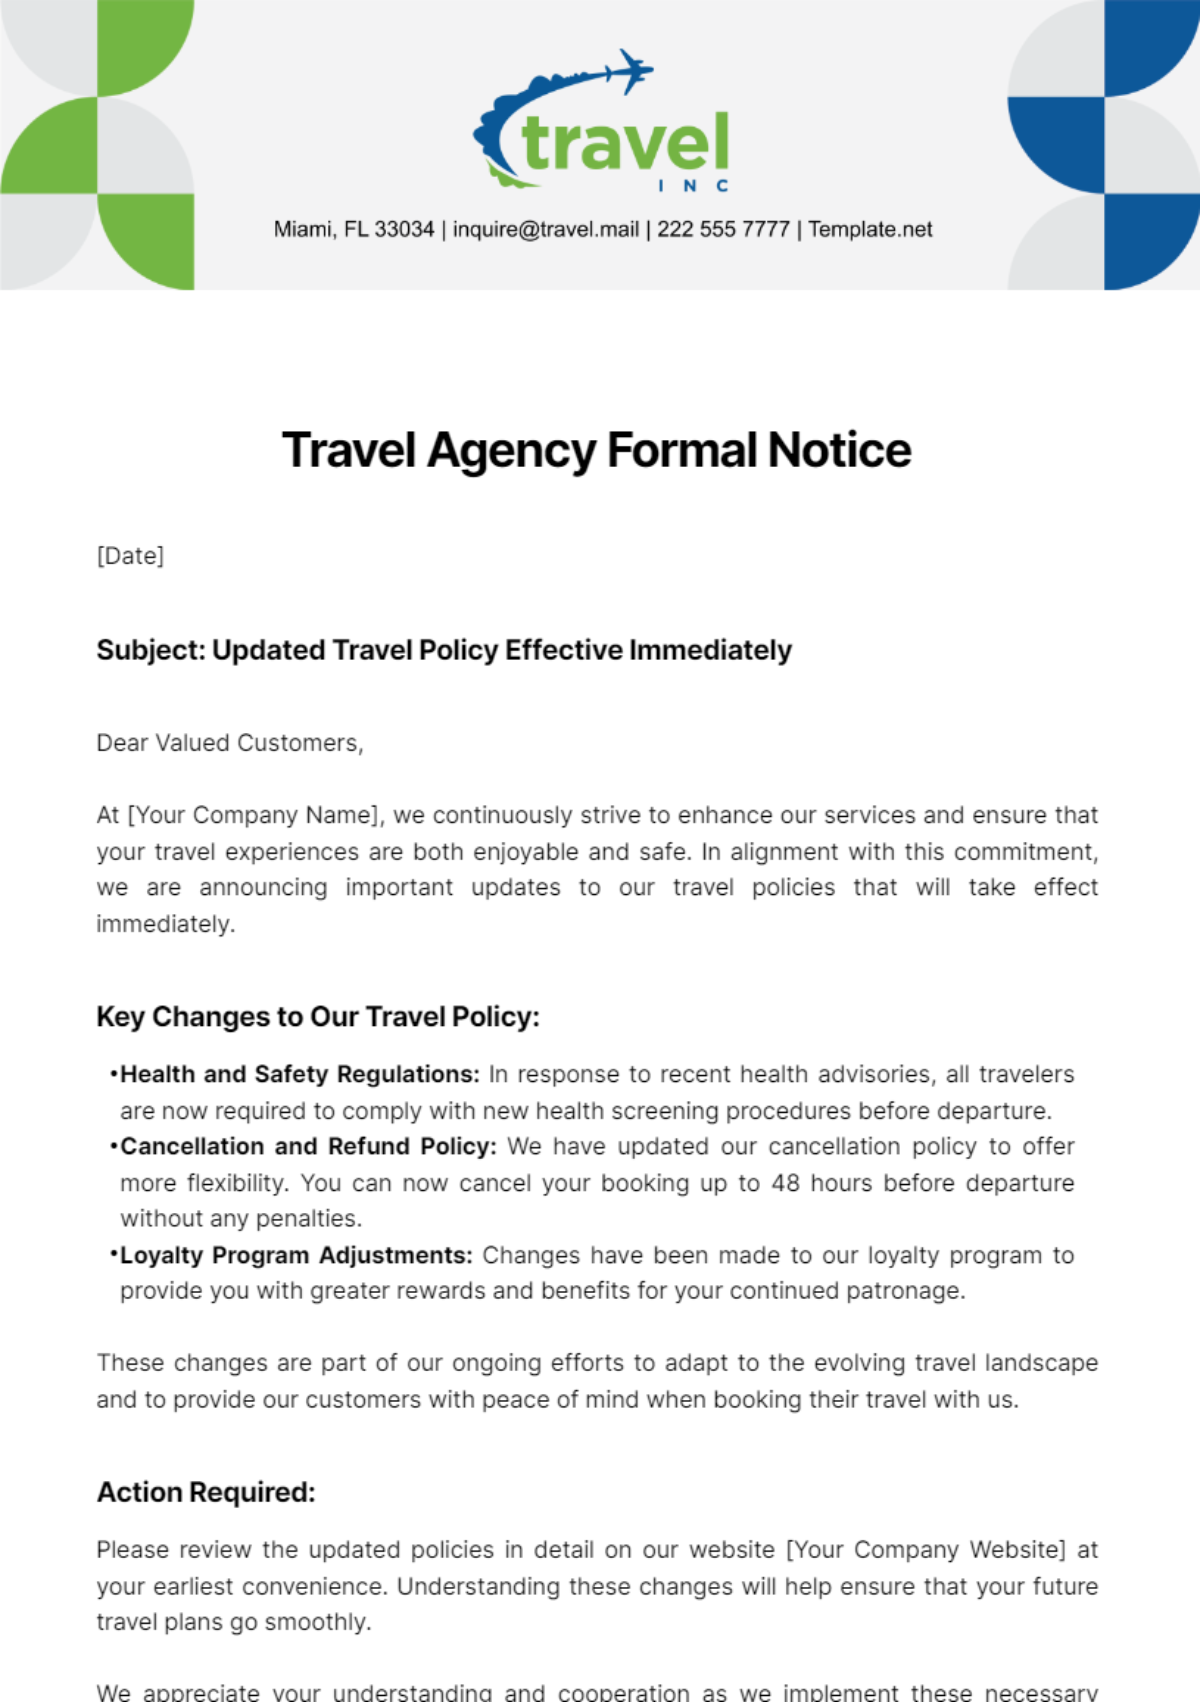 Travel Agency Formal Notice Template